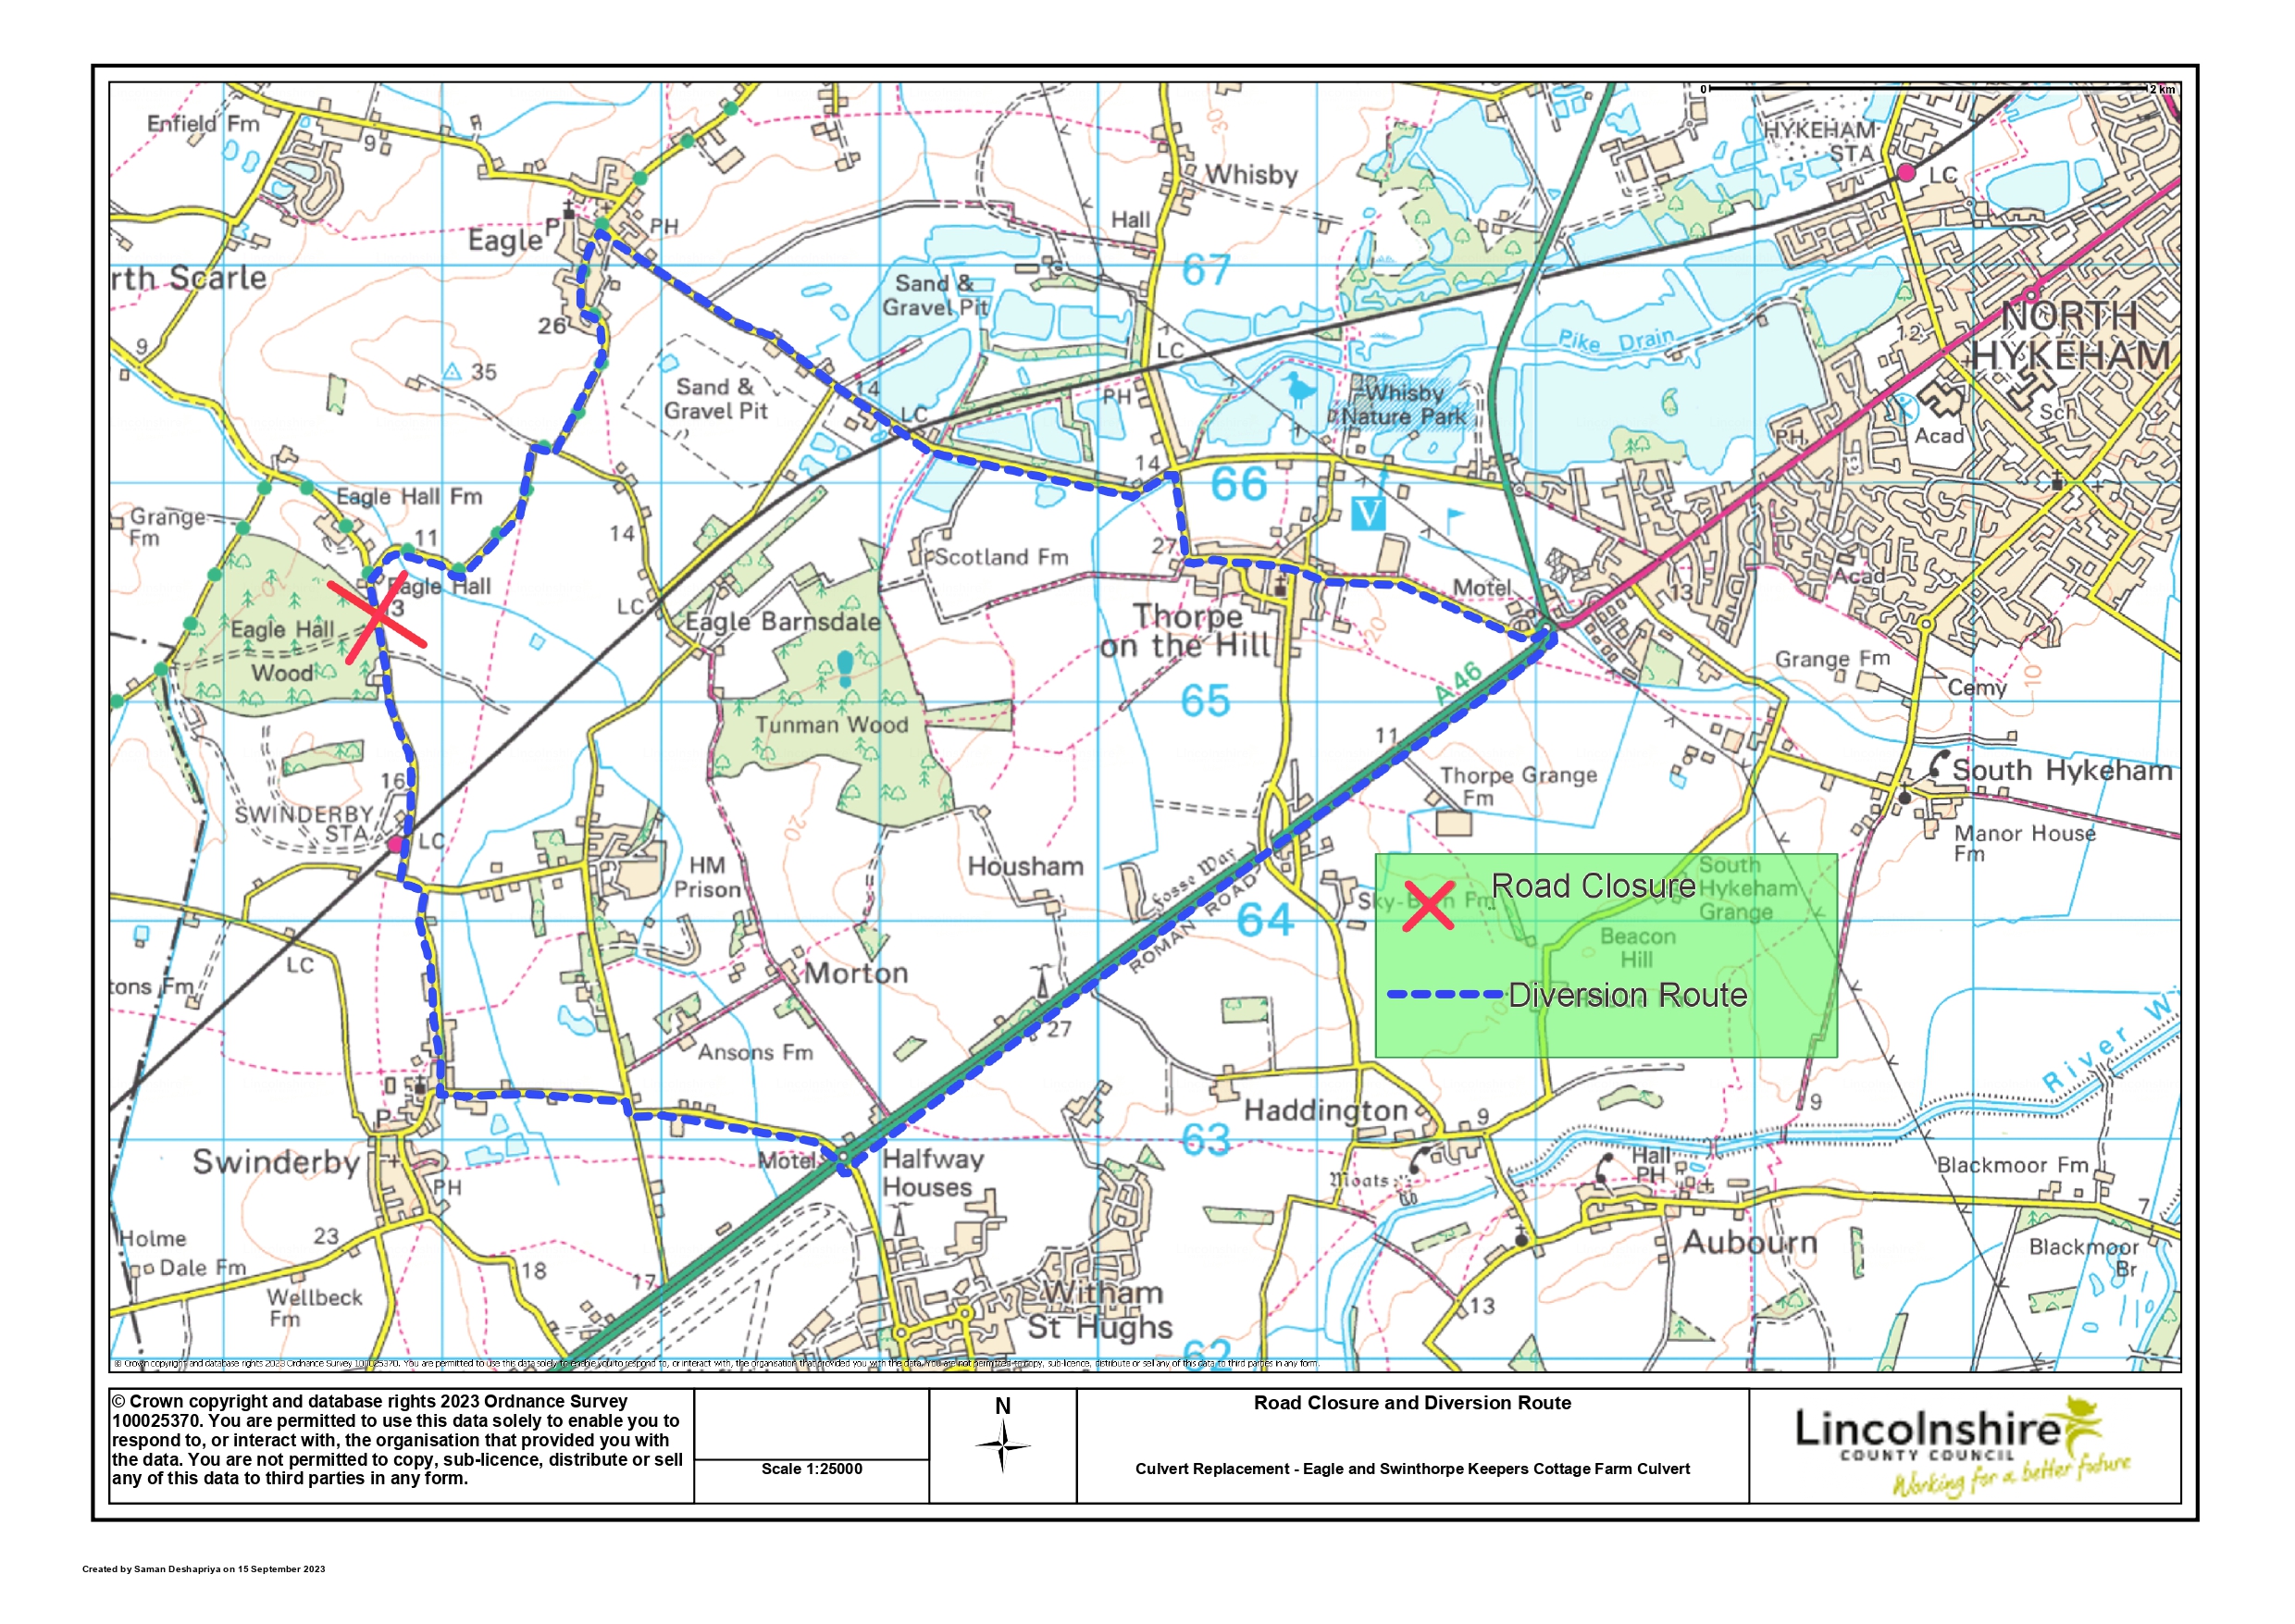 Culvert works underway in New Year - road closure and diversion route